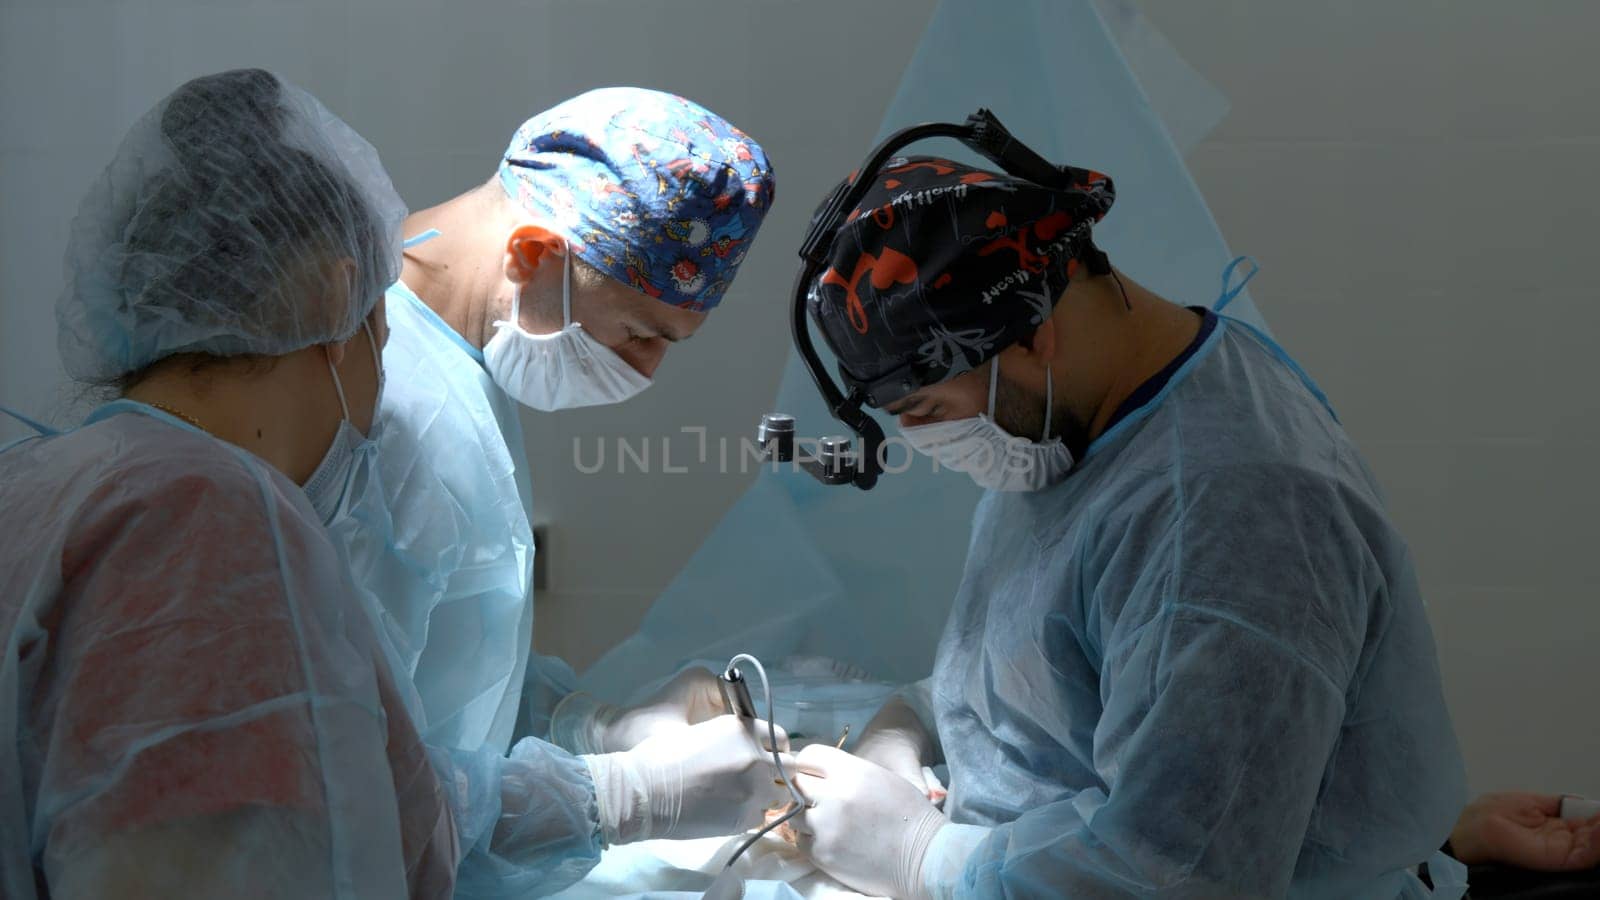 Group of surgeons working in operating room at hospital. Action. Nurse helping two doctors during surgery. by Mediawhalestock